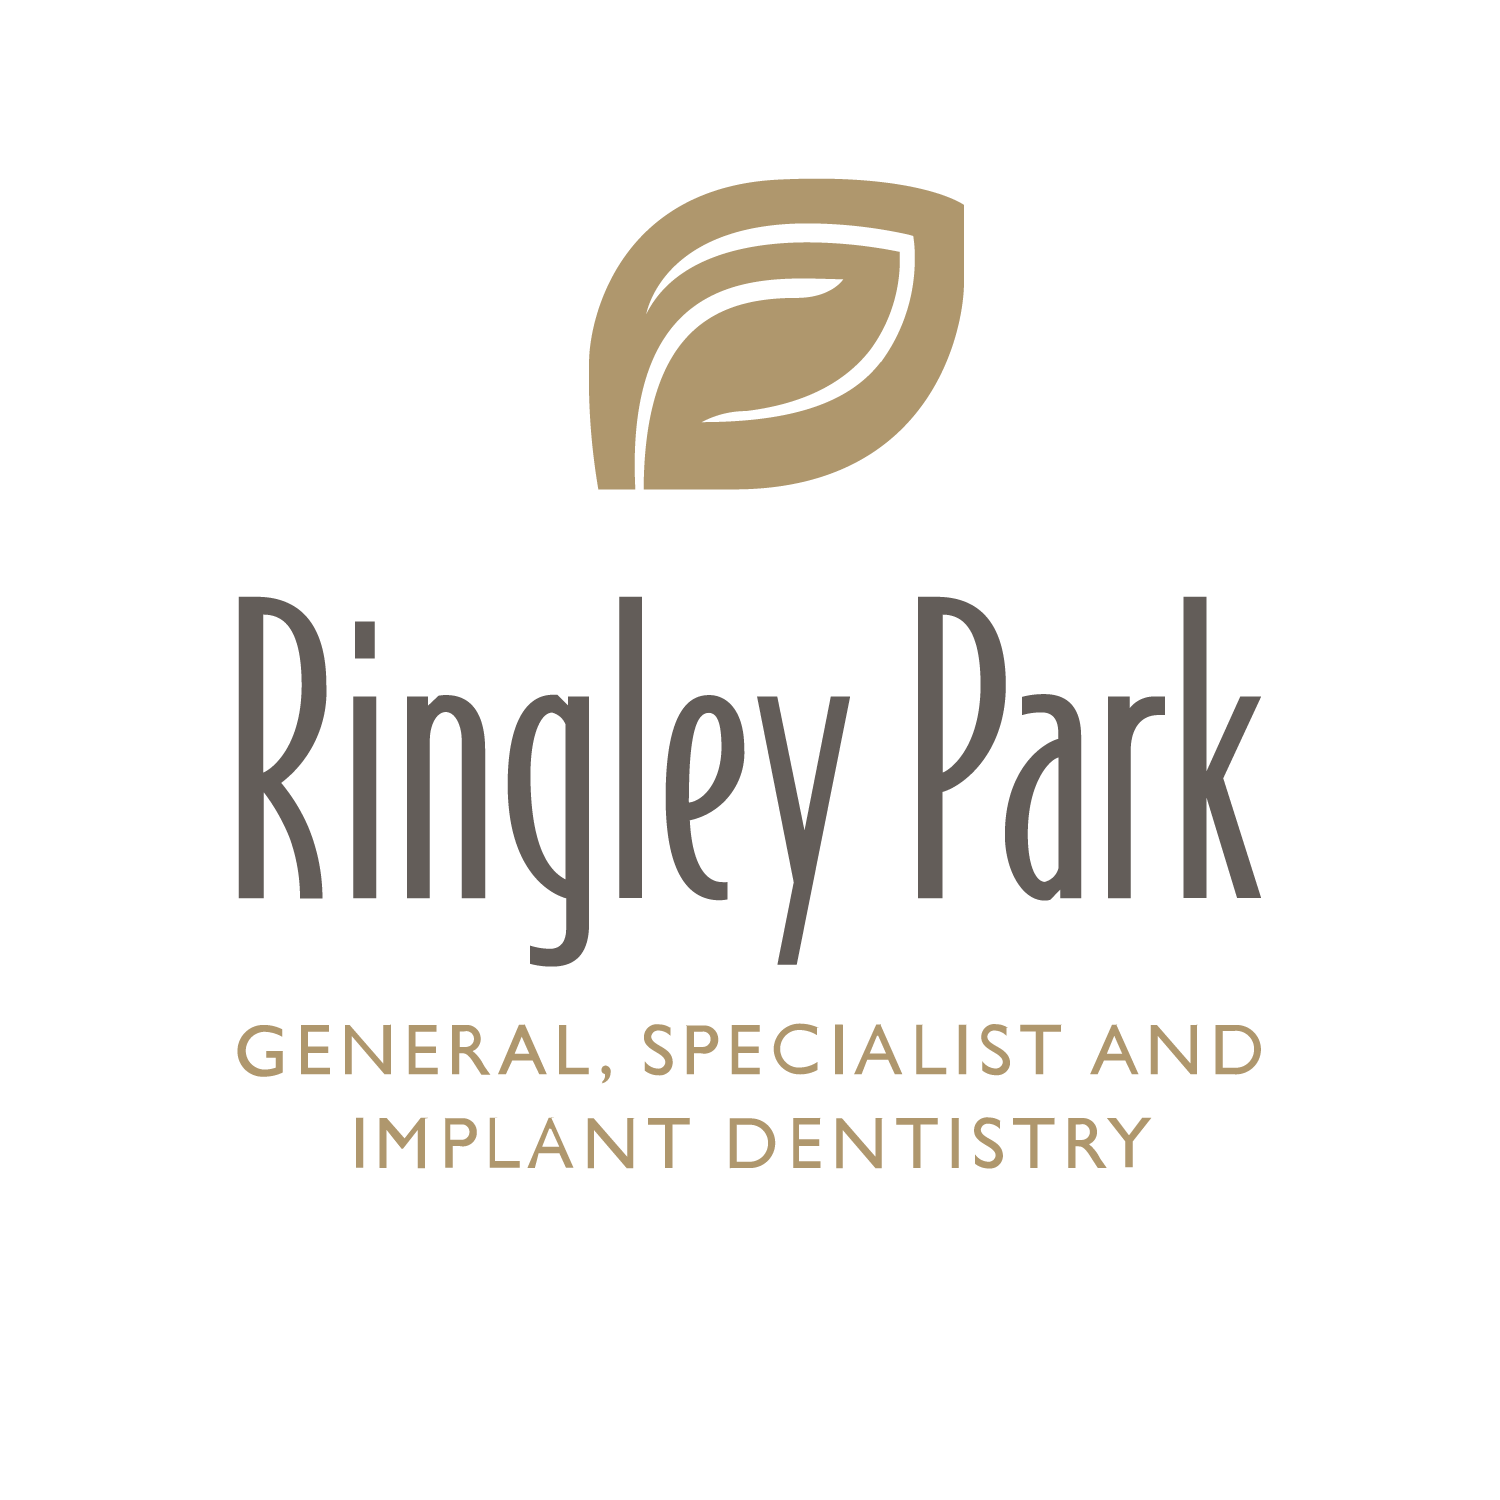 Ringley Park Dental Practice as part of Dentex Assets Limited registered in England and Wales with Company Number 10906575